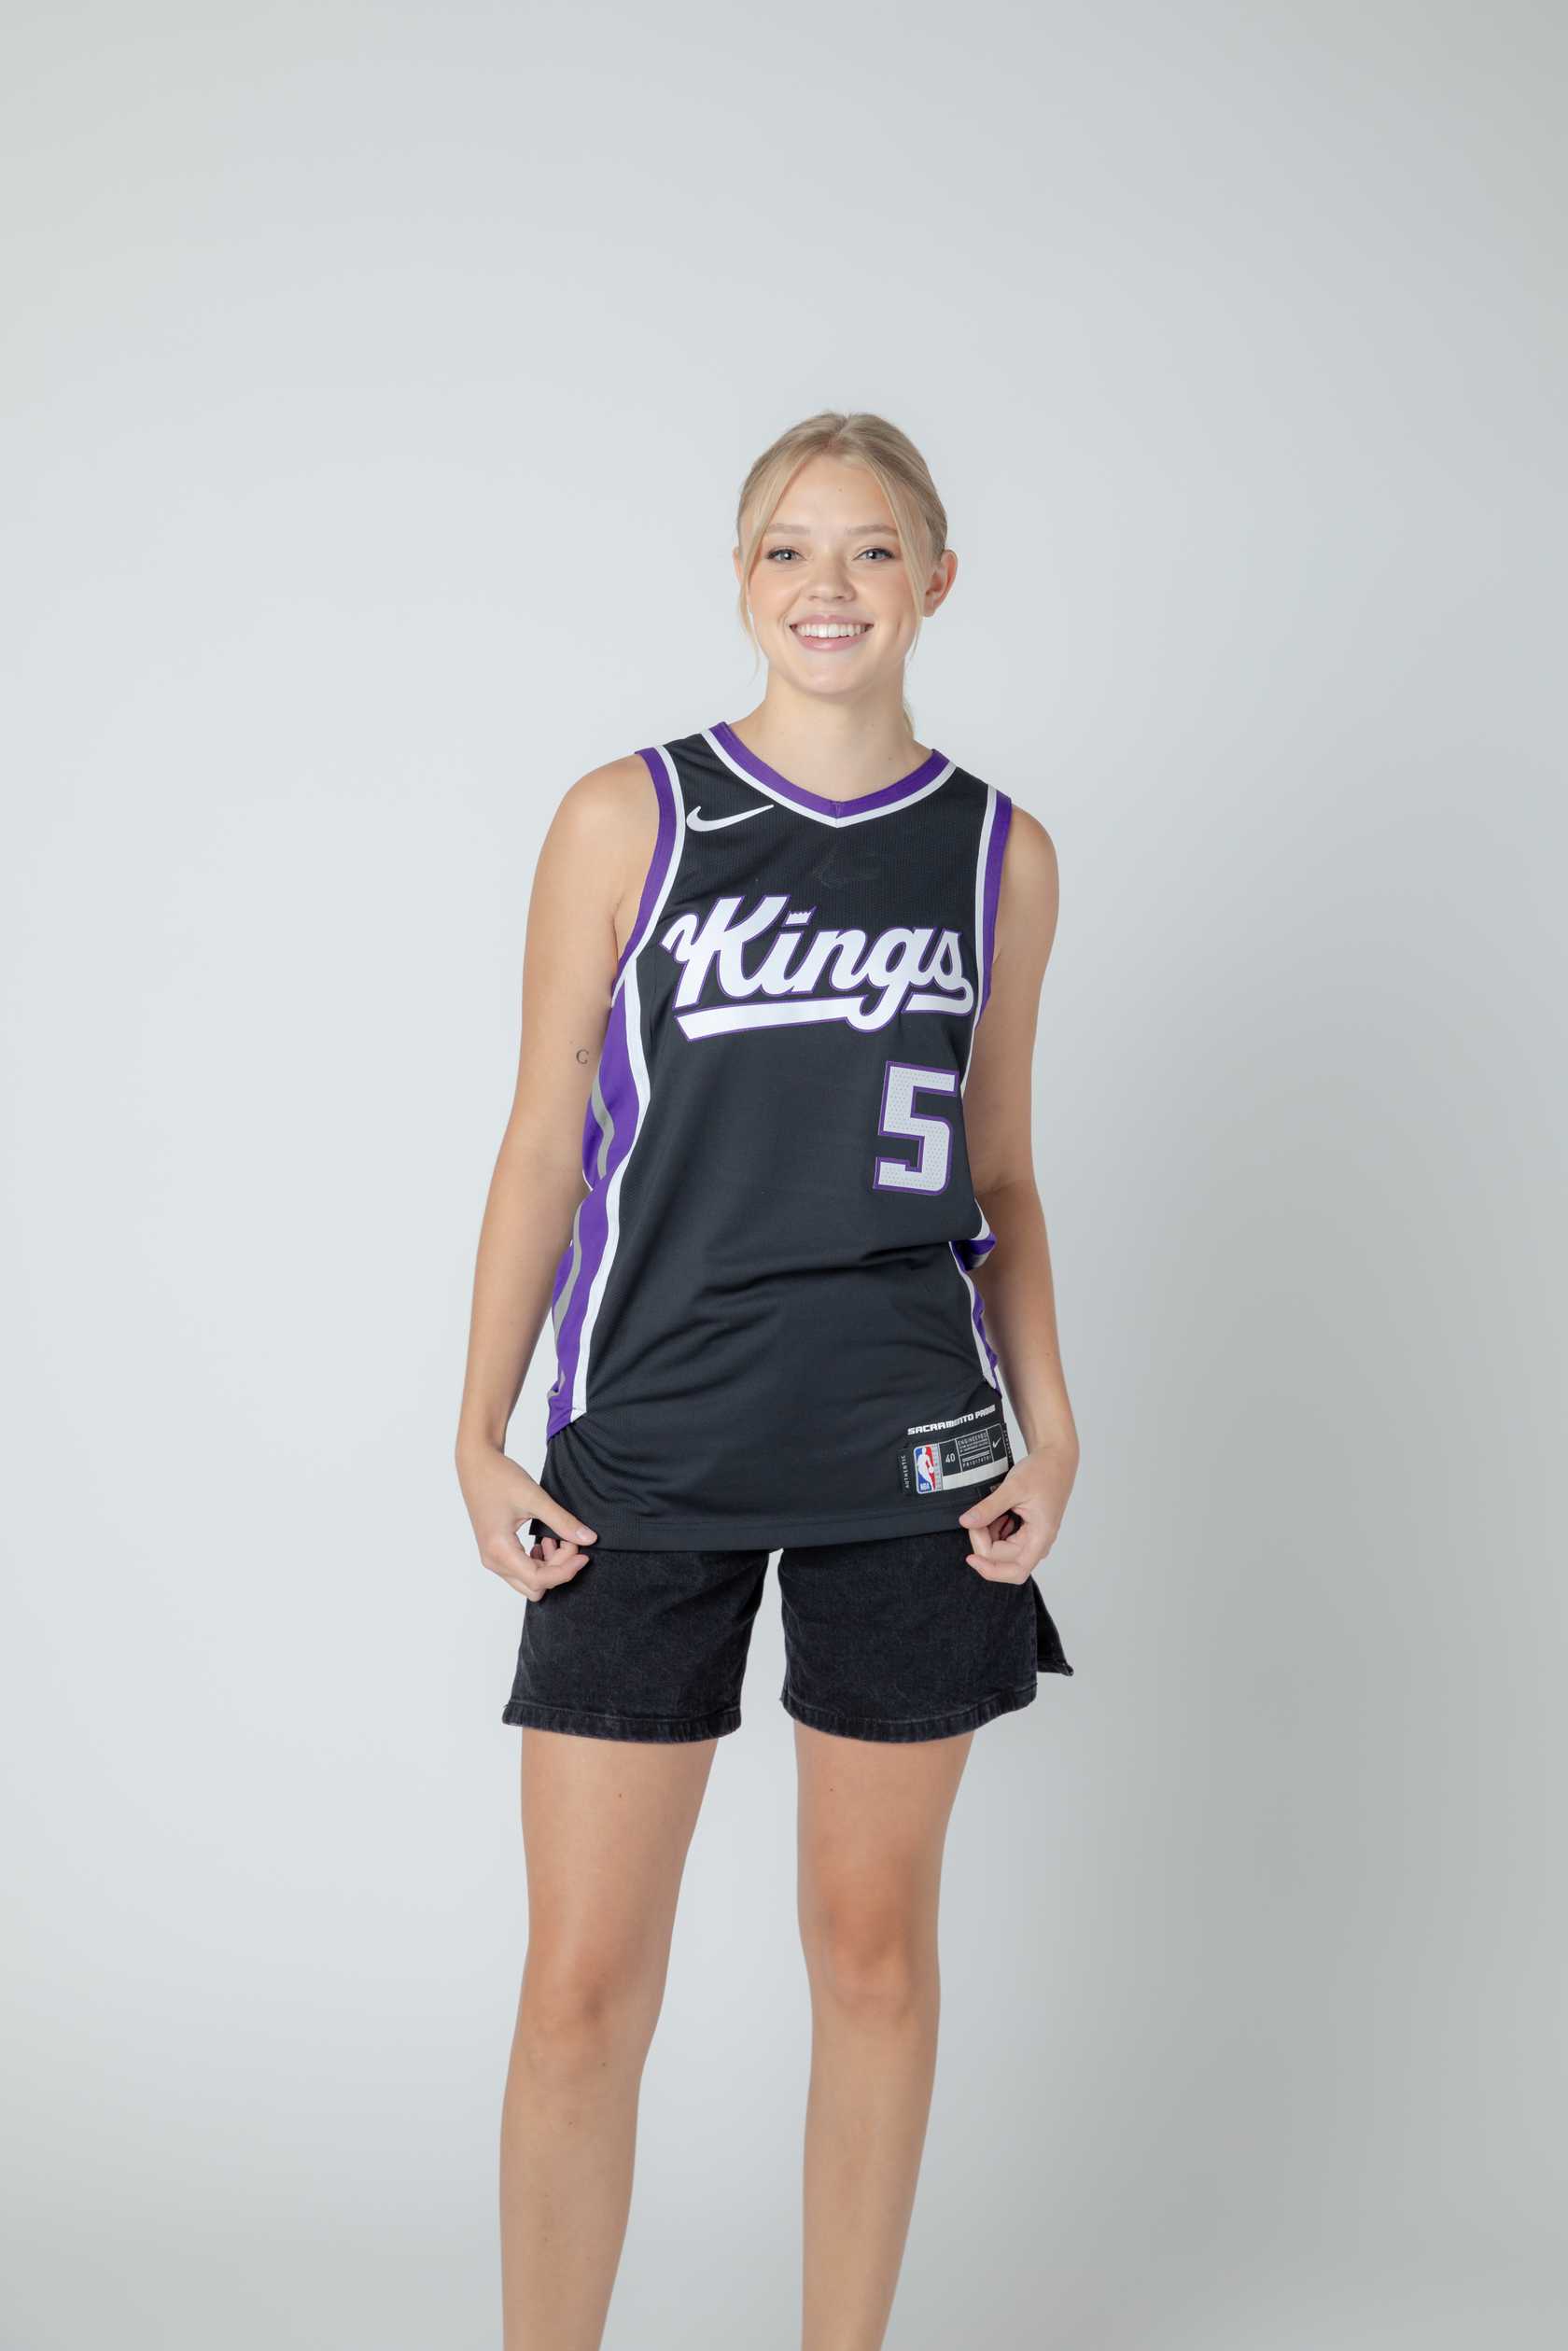 Youth basketball uniform packages for 75 USD Free shipping USA